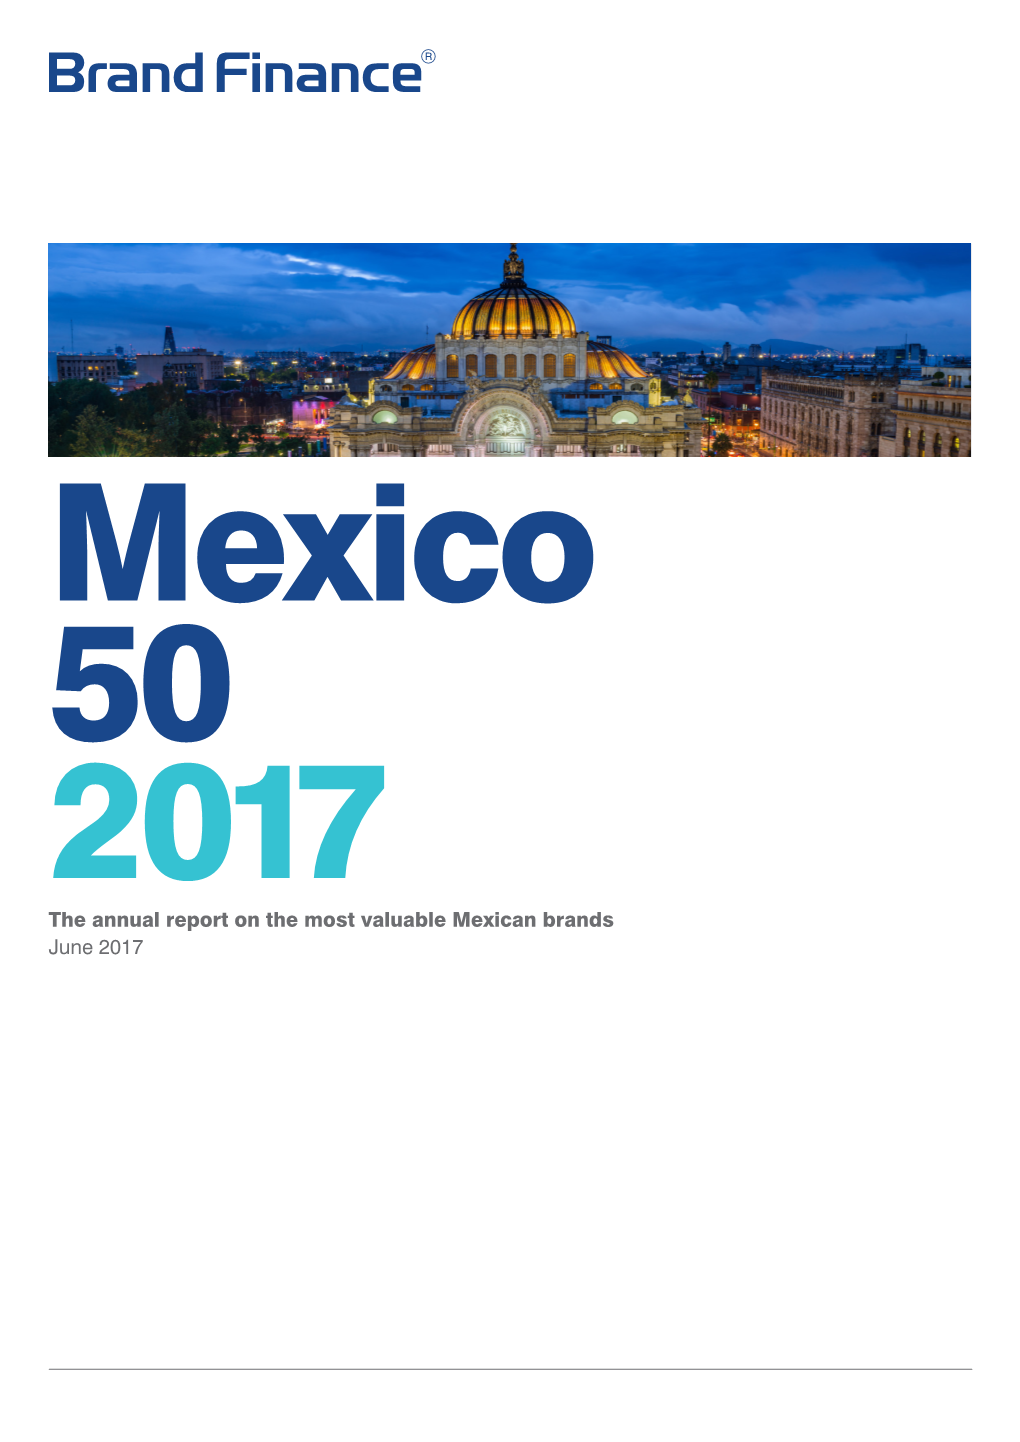 Brand Finance Mexico 50 2017 Also Ranks 2 of the Value